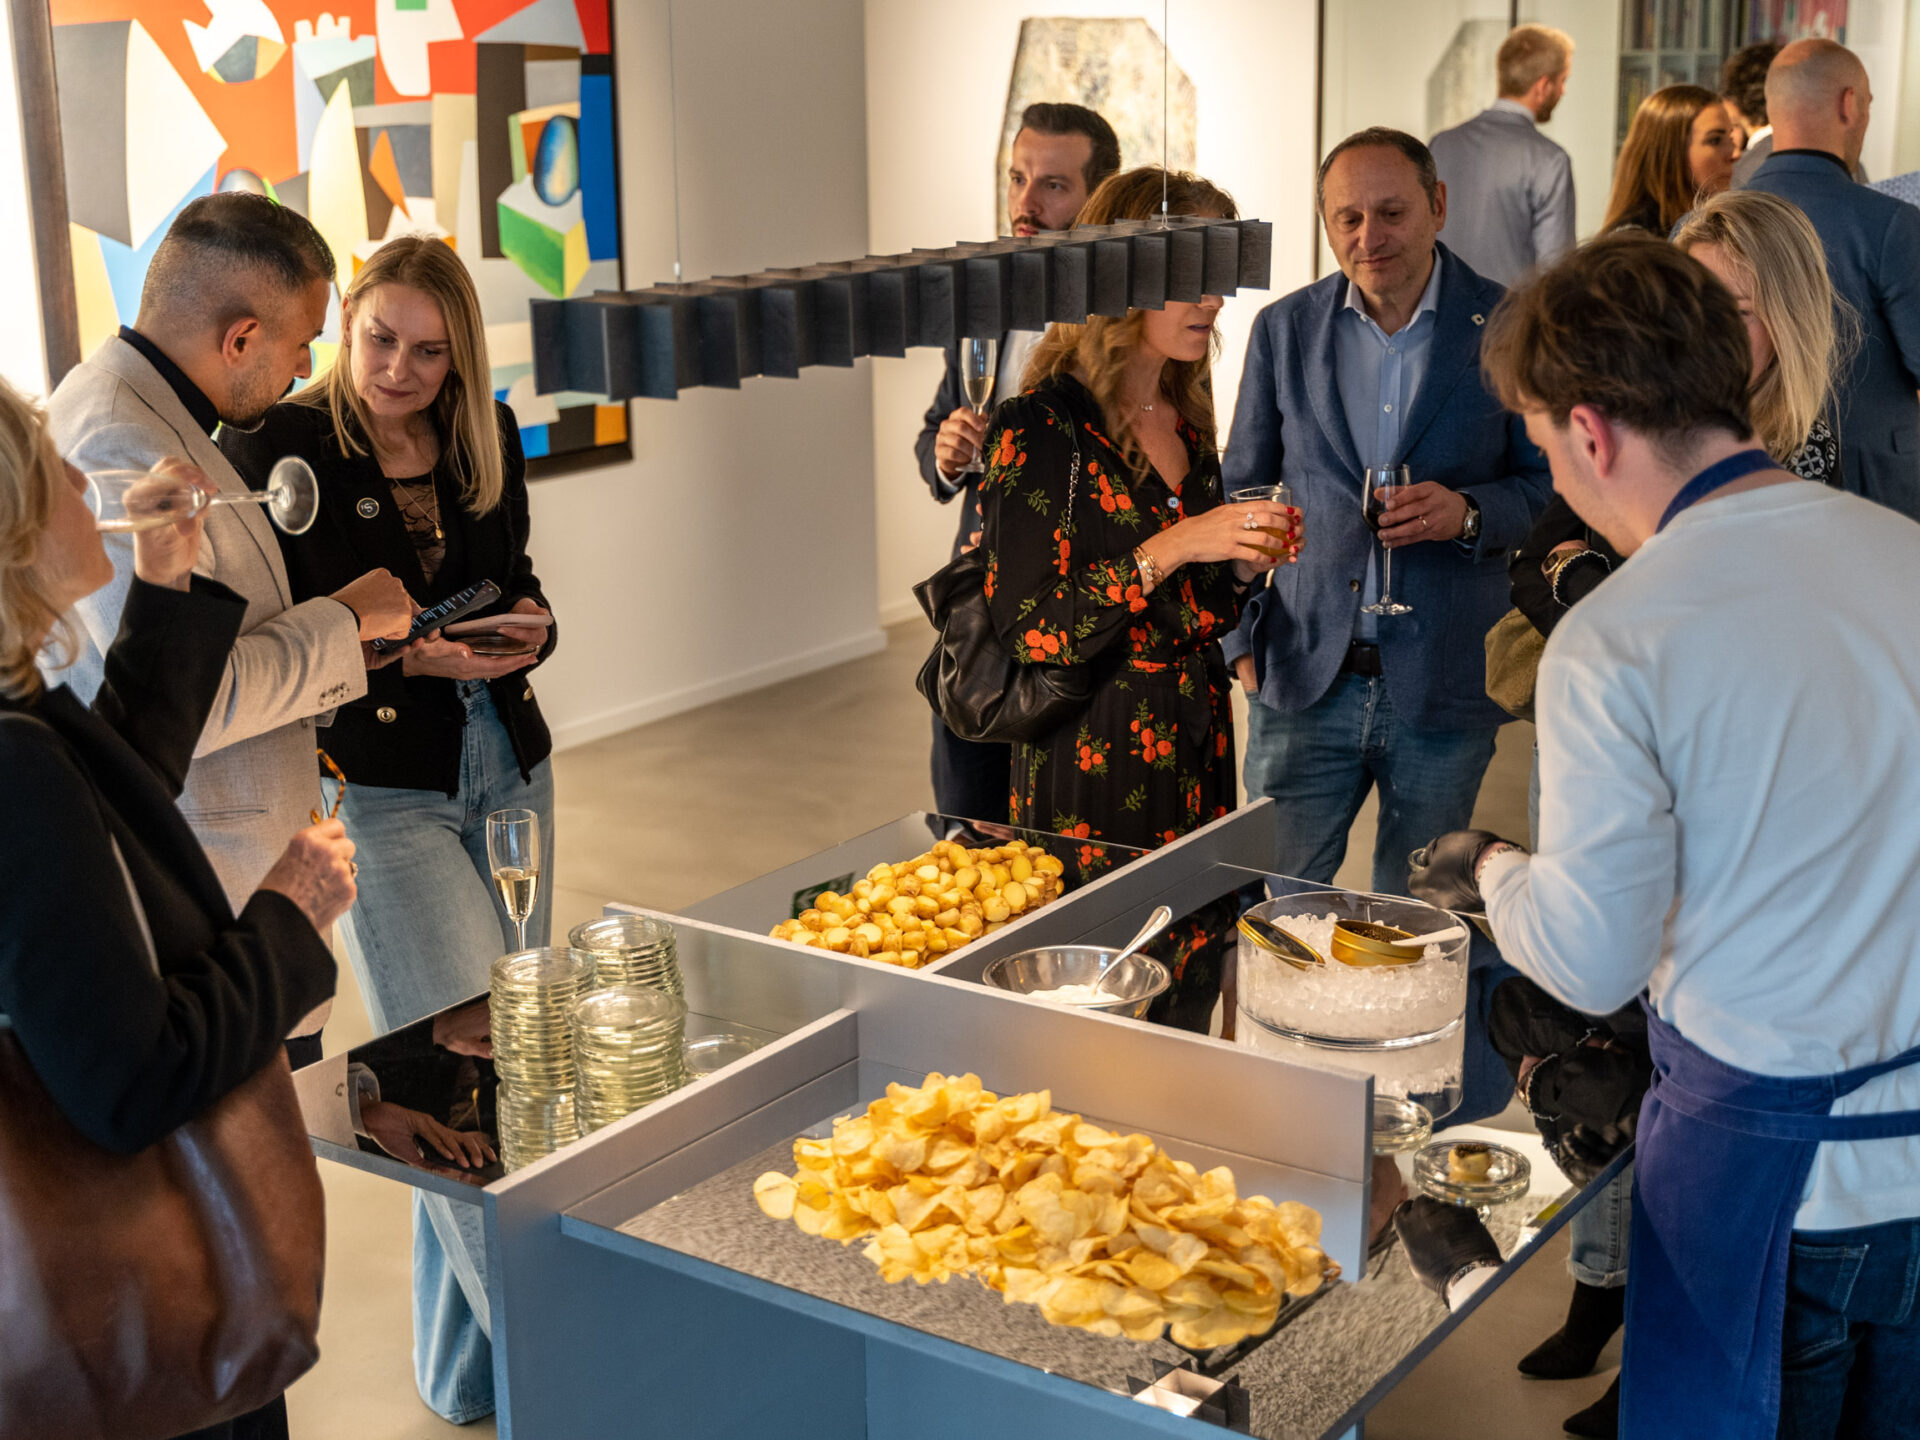 Belgium Sothebys Int. Realty The ‘S party NL